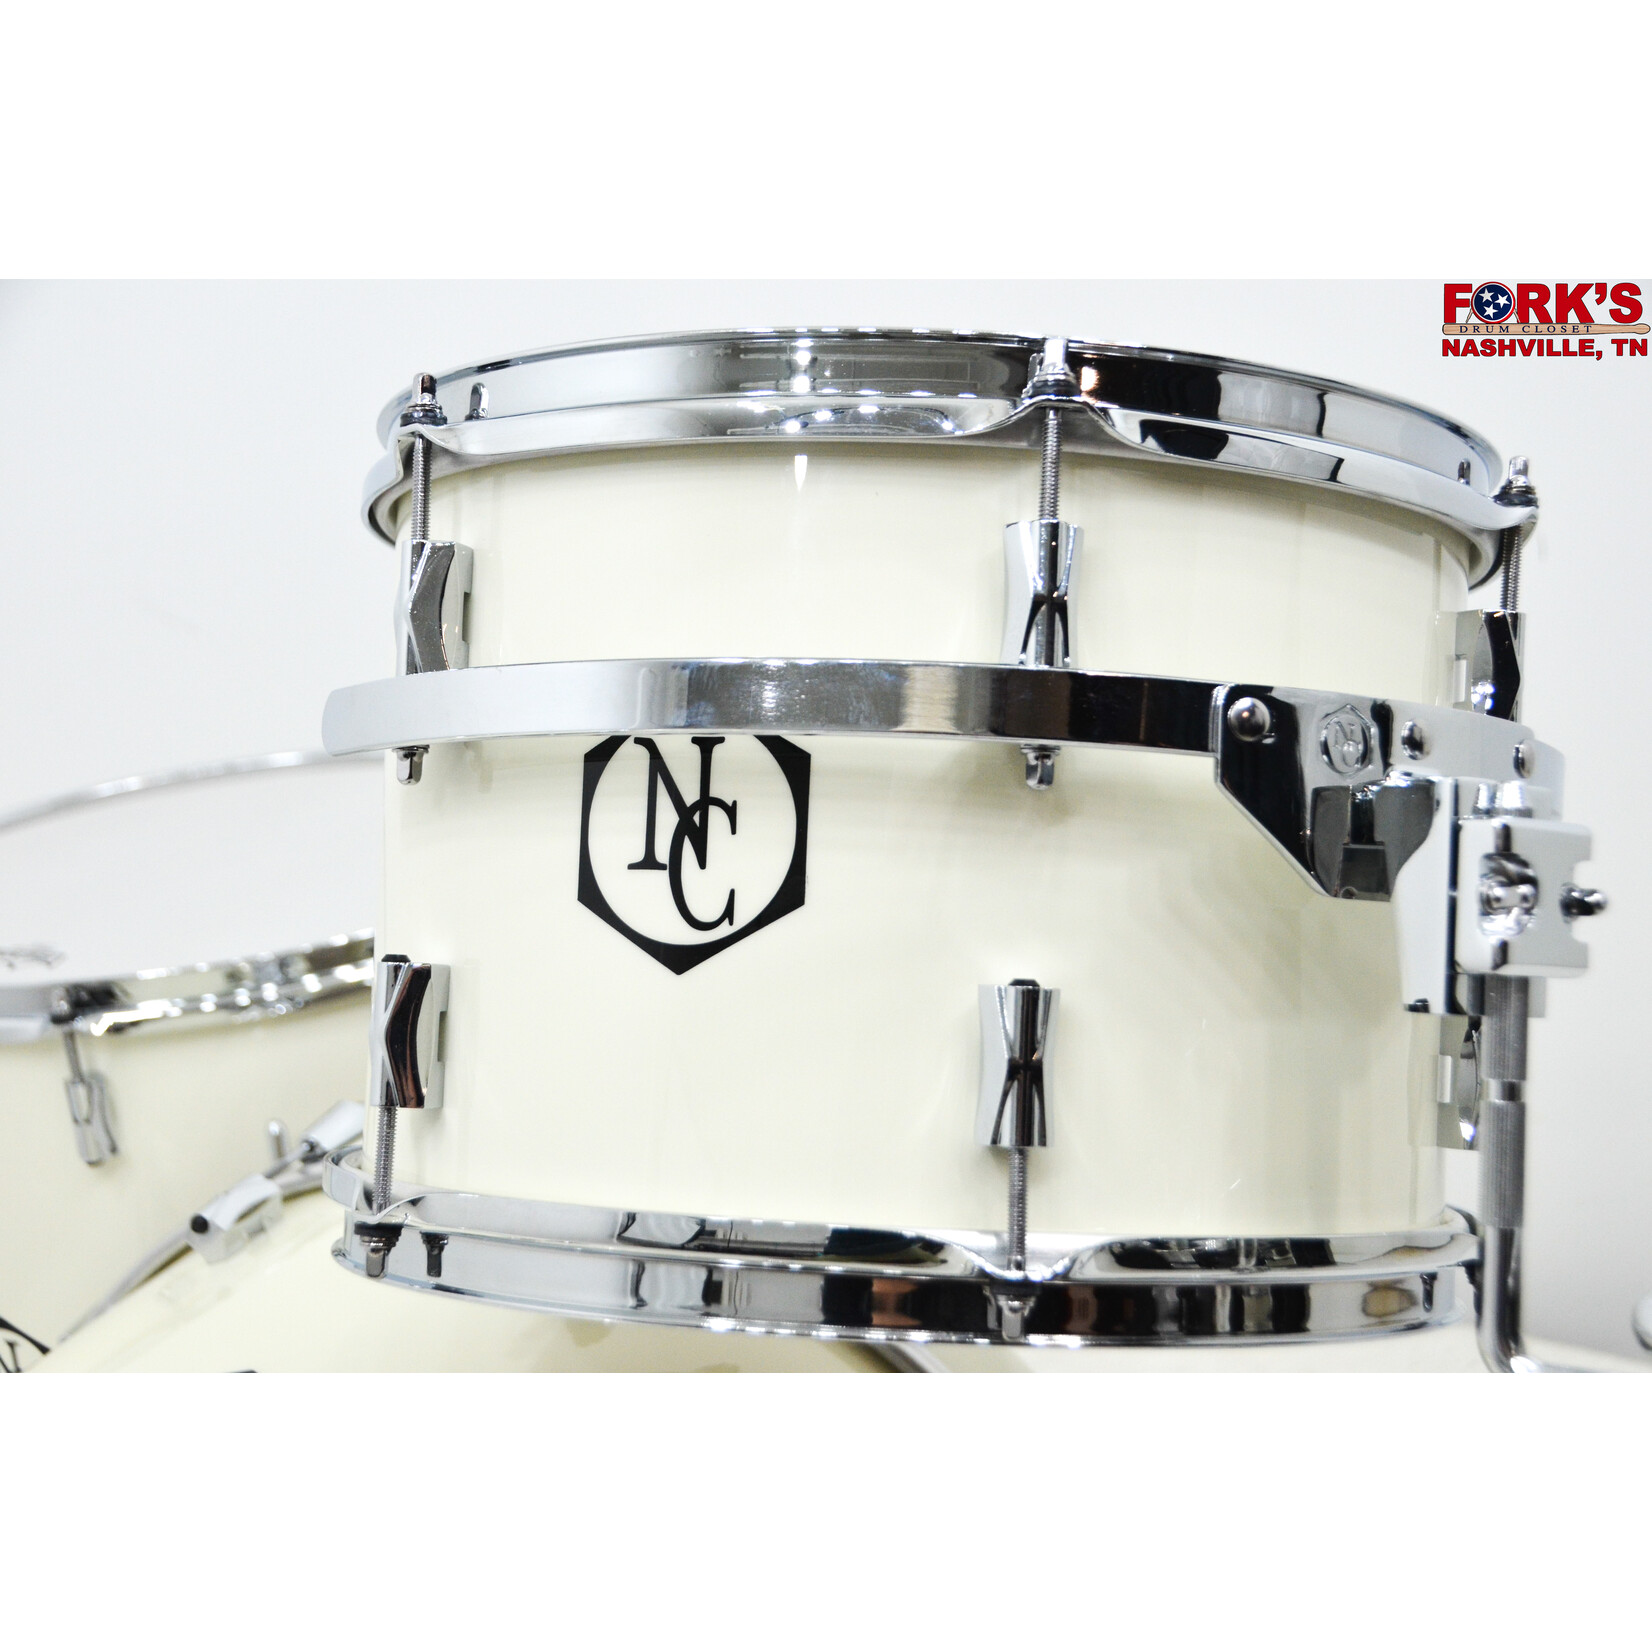 Noble and Cooley Noble & Cooley CD Maple 3pc Drum Kit - "Antique White Lacquer"